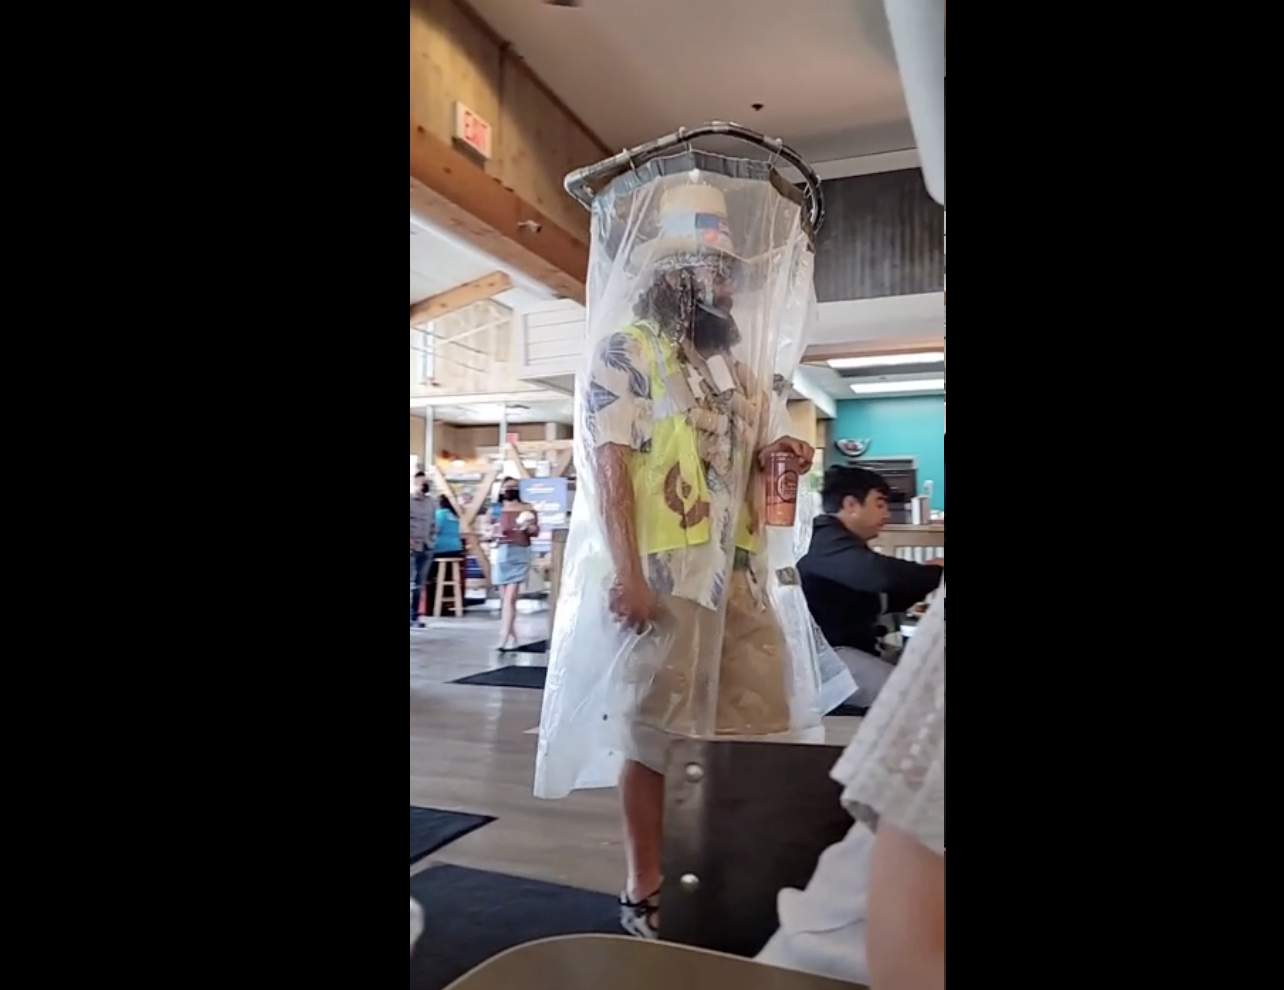 Social media video shows San Antonio man wearing shower curtain covering in public